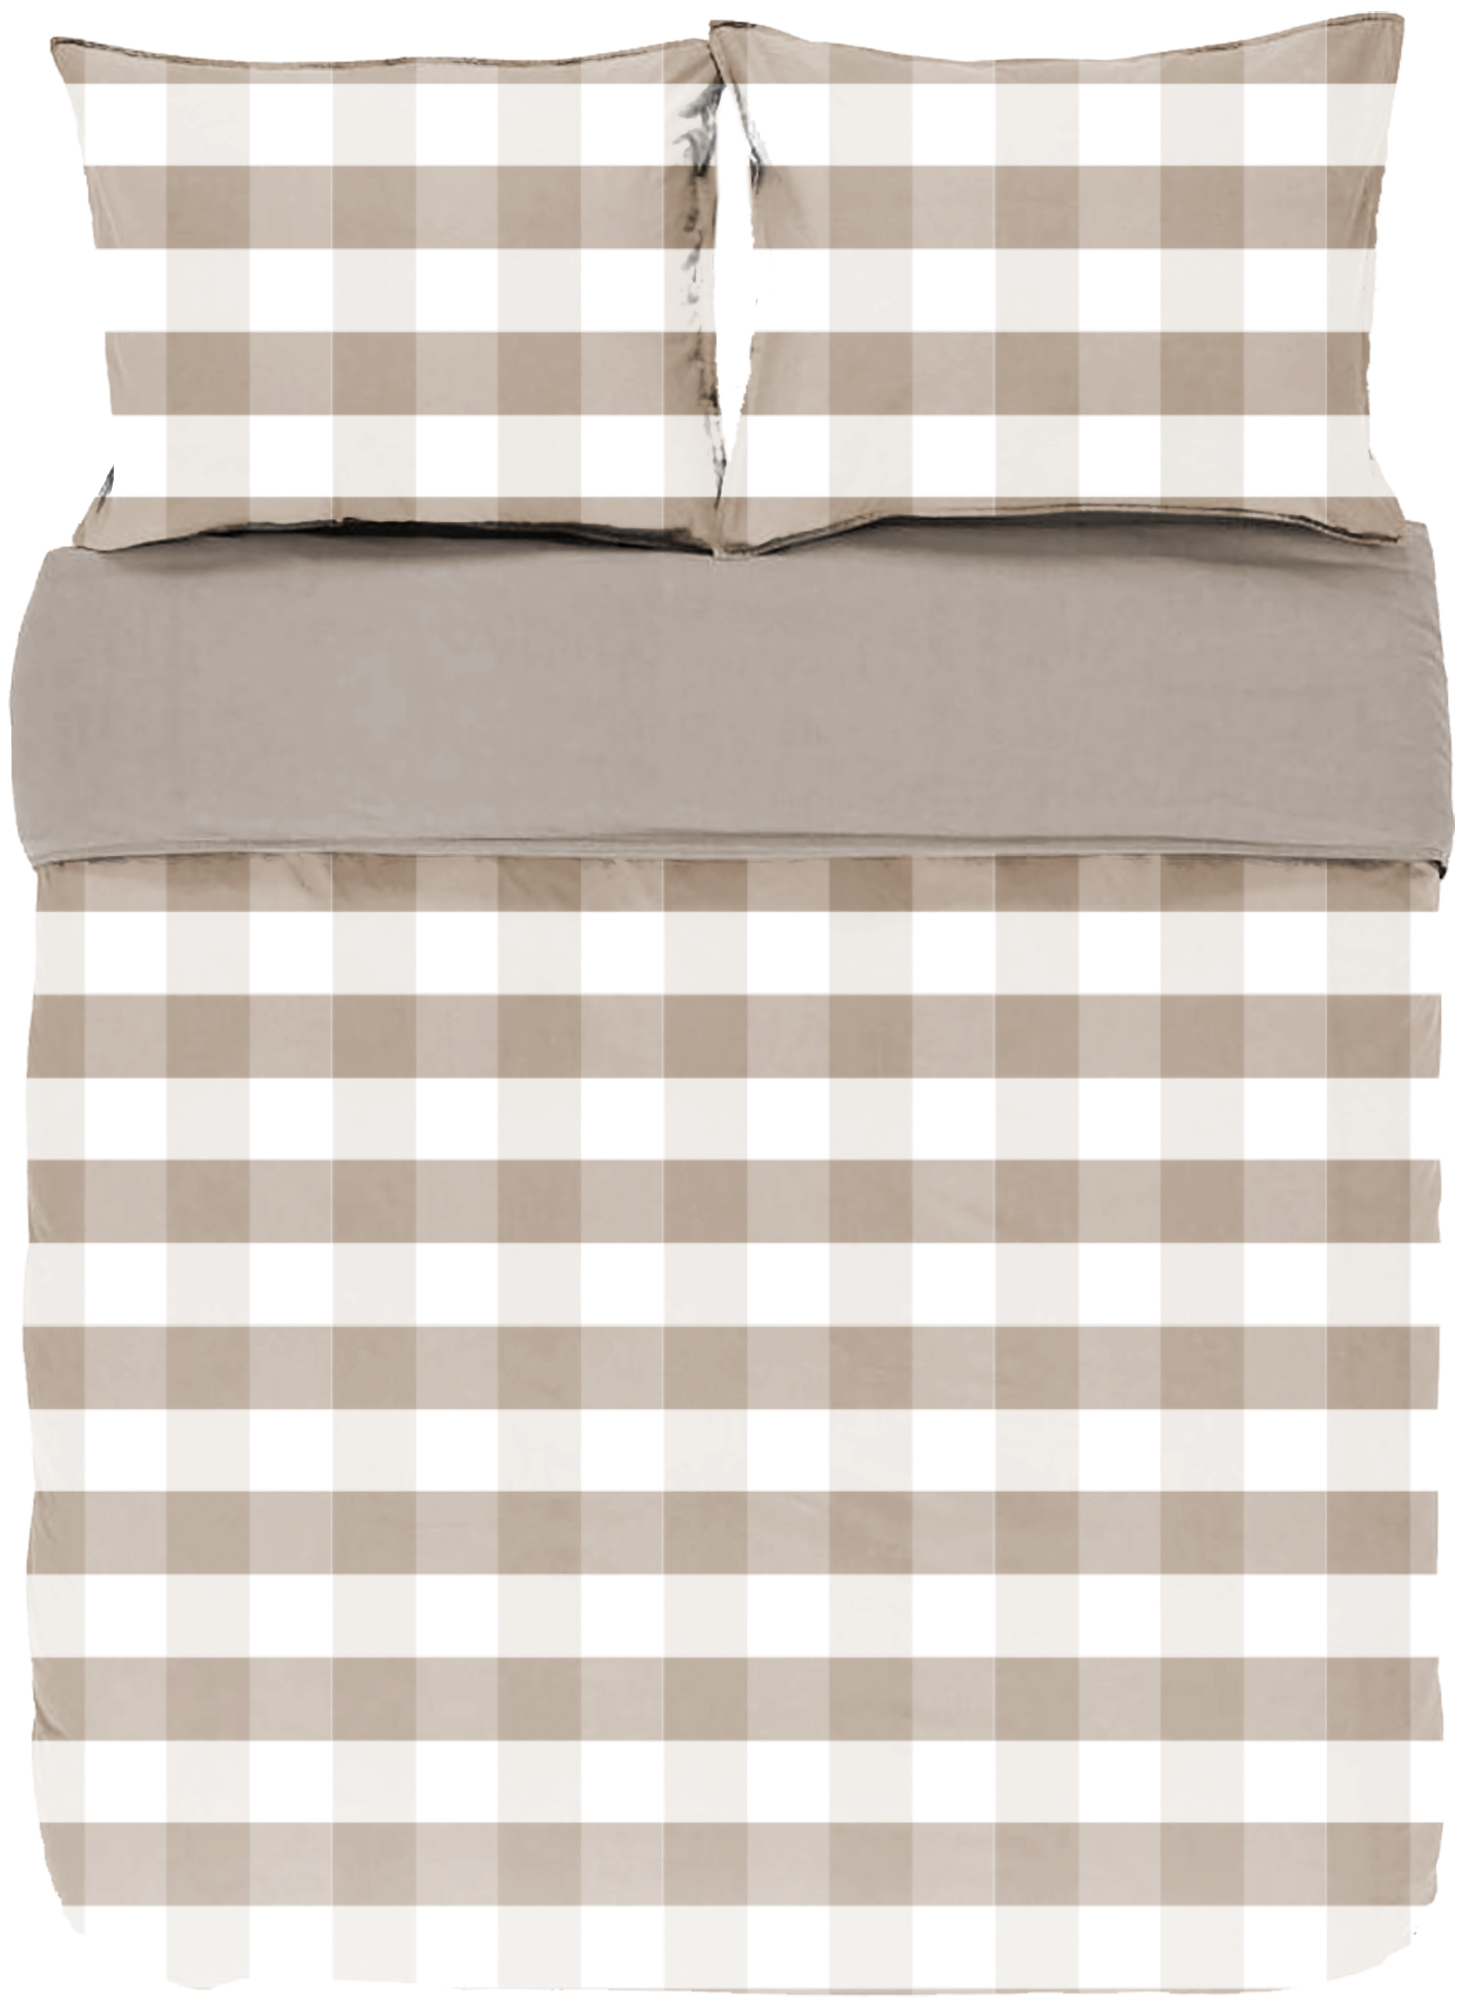 Housse de couette EMMA, Stone washed check coton, 240x220, taupe